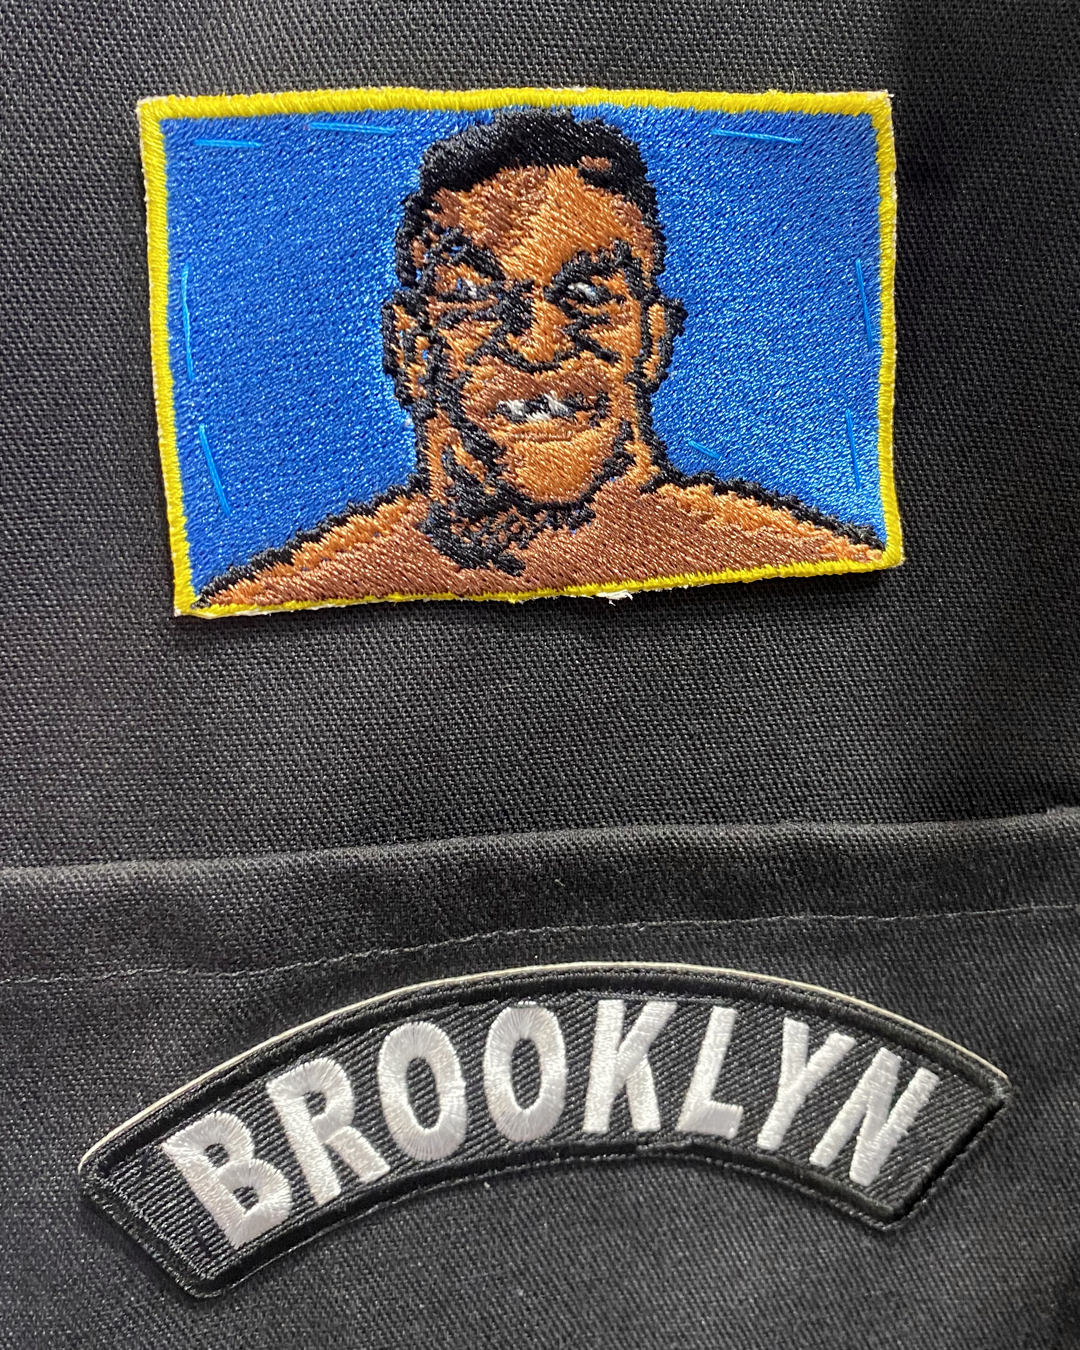 mike tyson jacket patches1.png